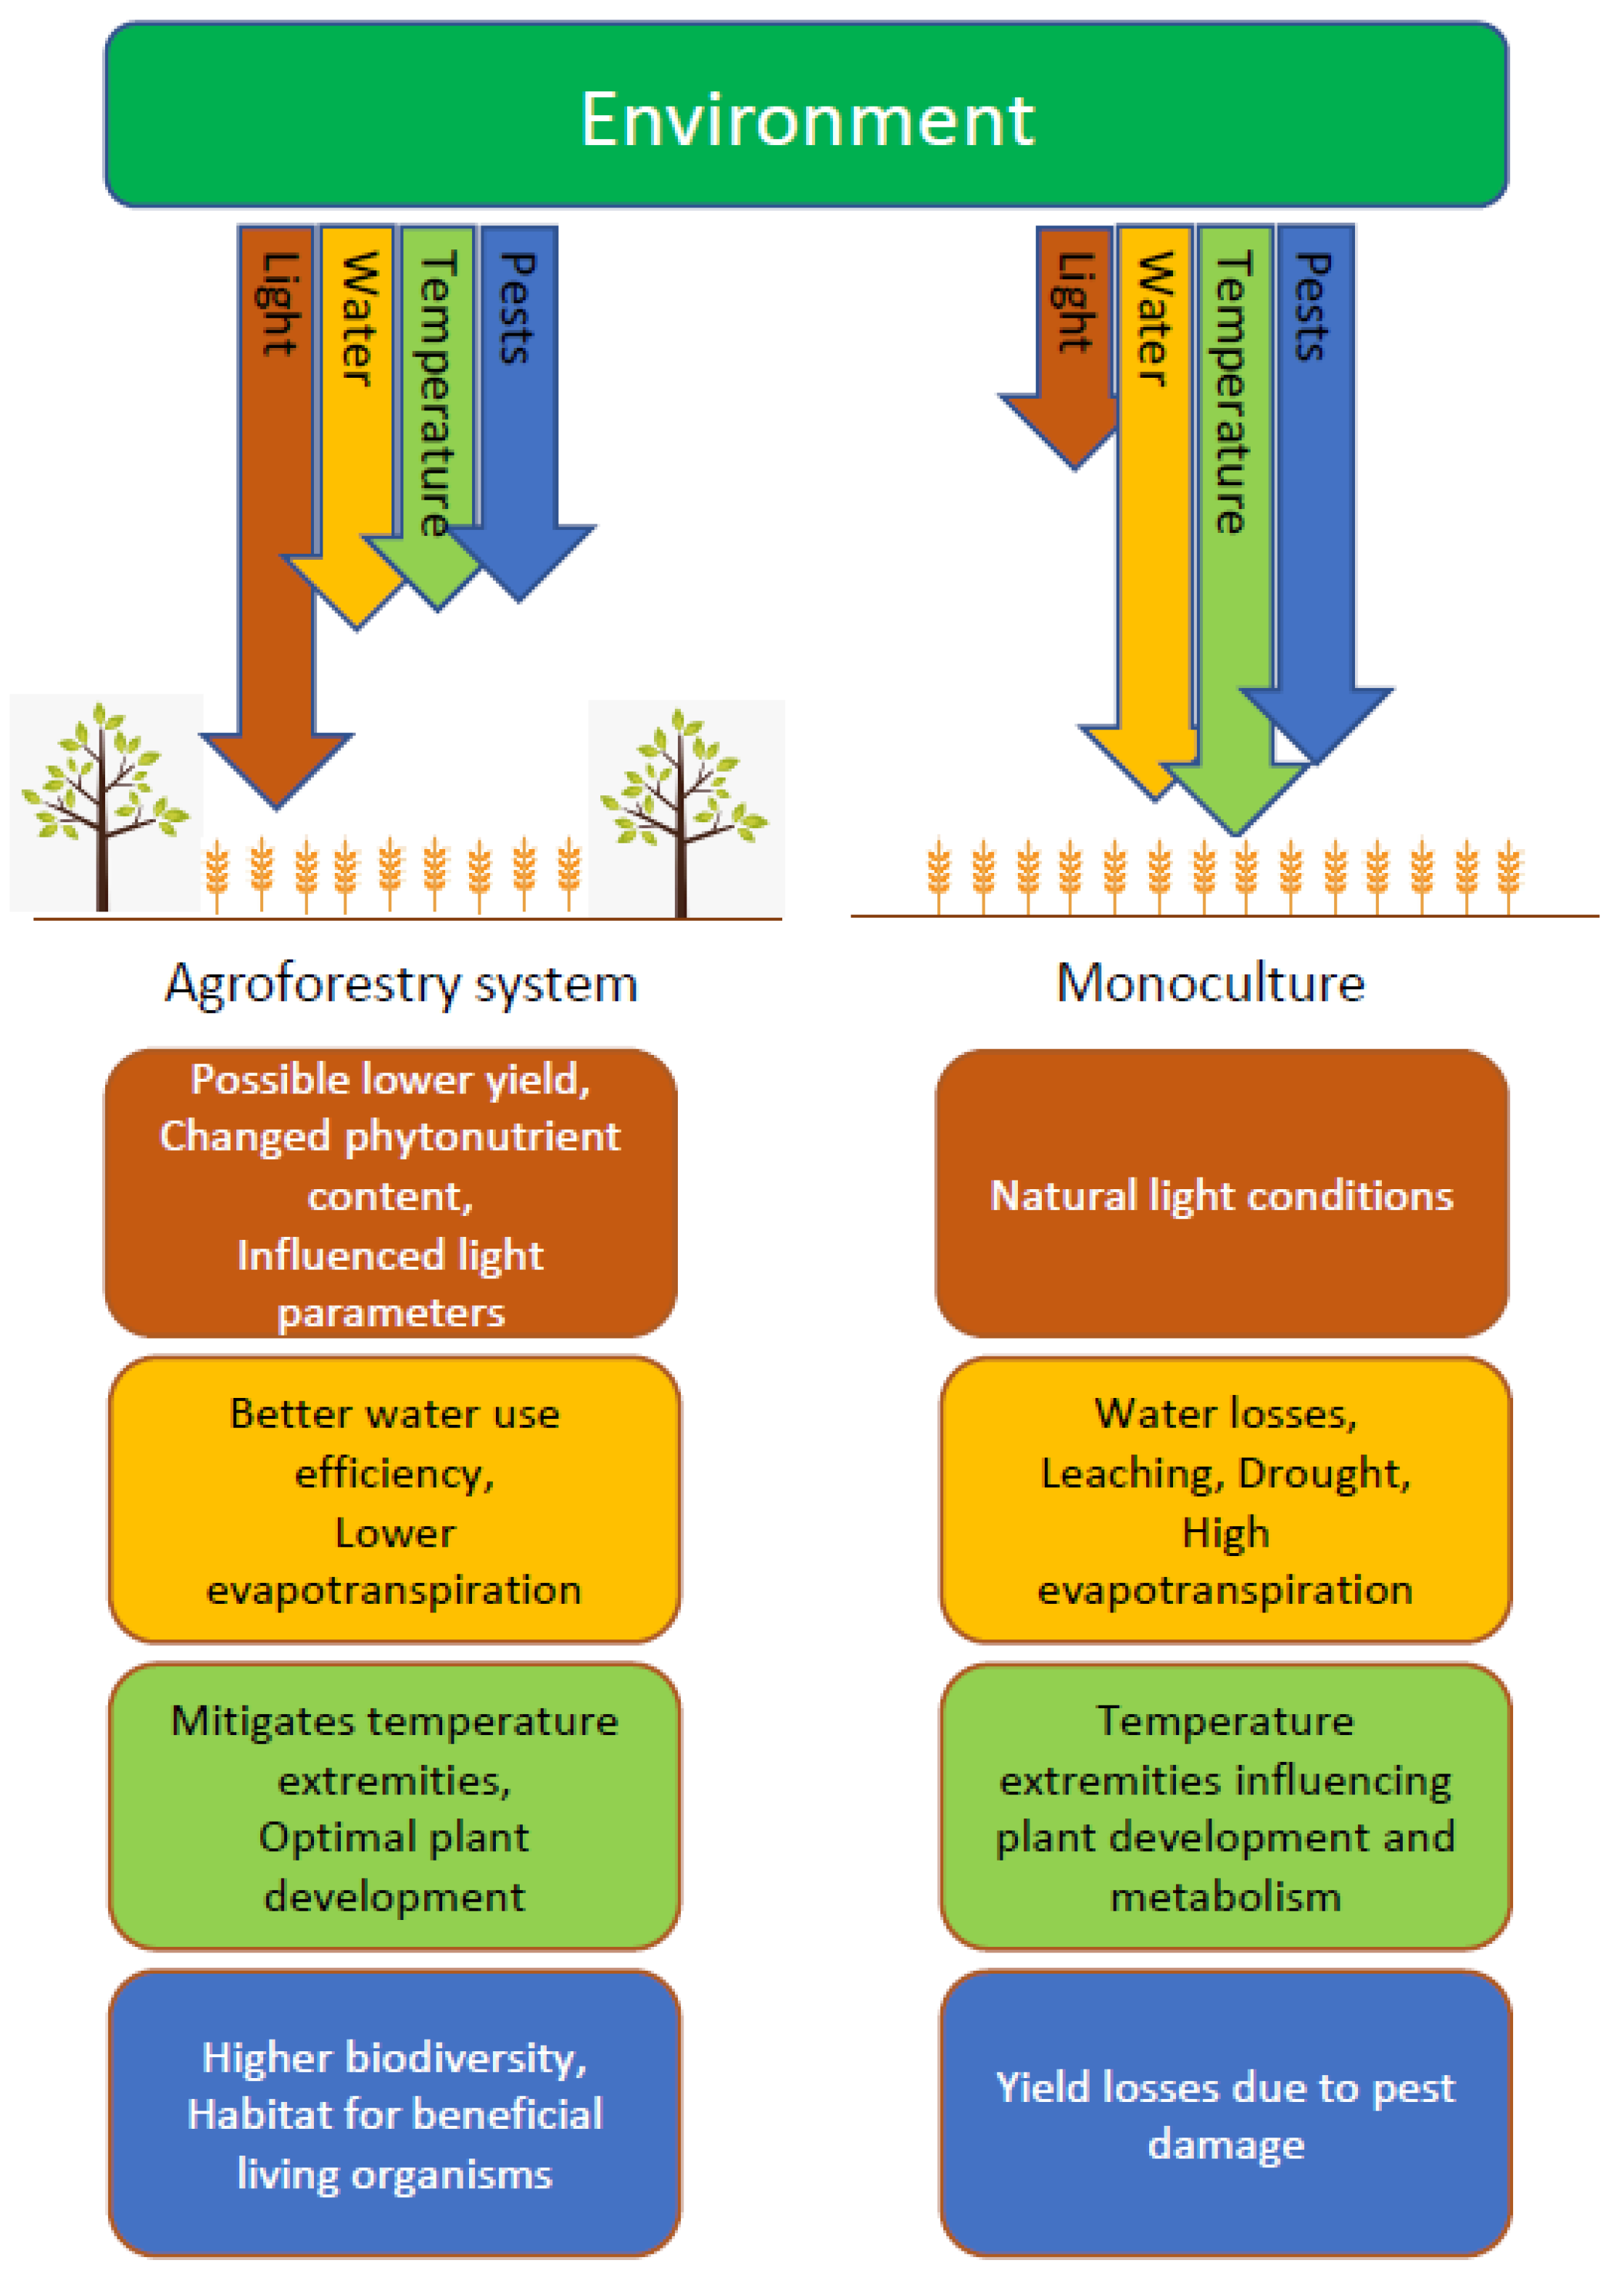 Plant functional traits and types: Their relevance for a better